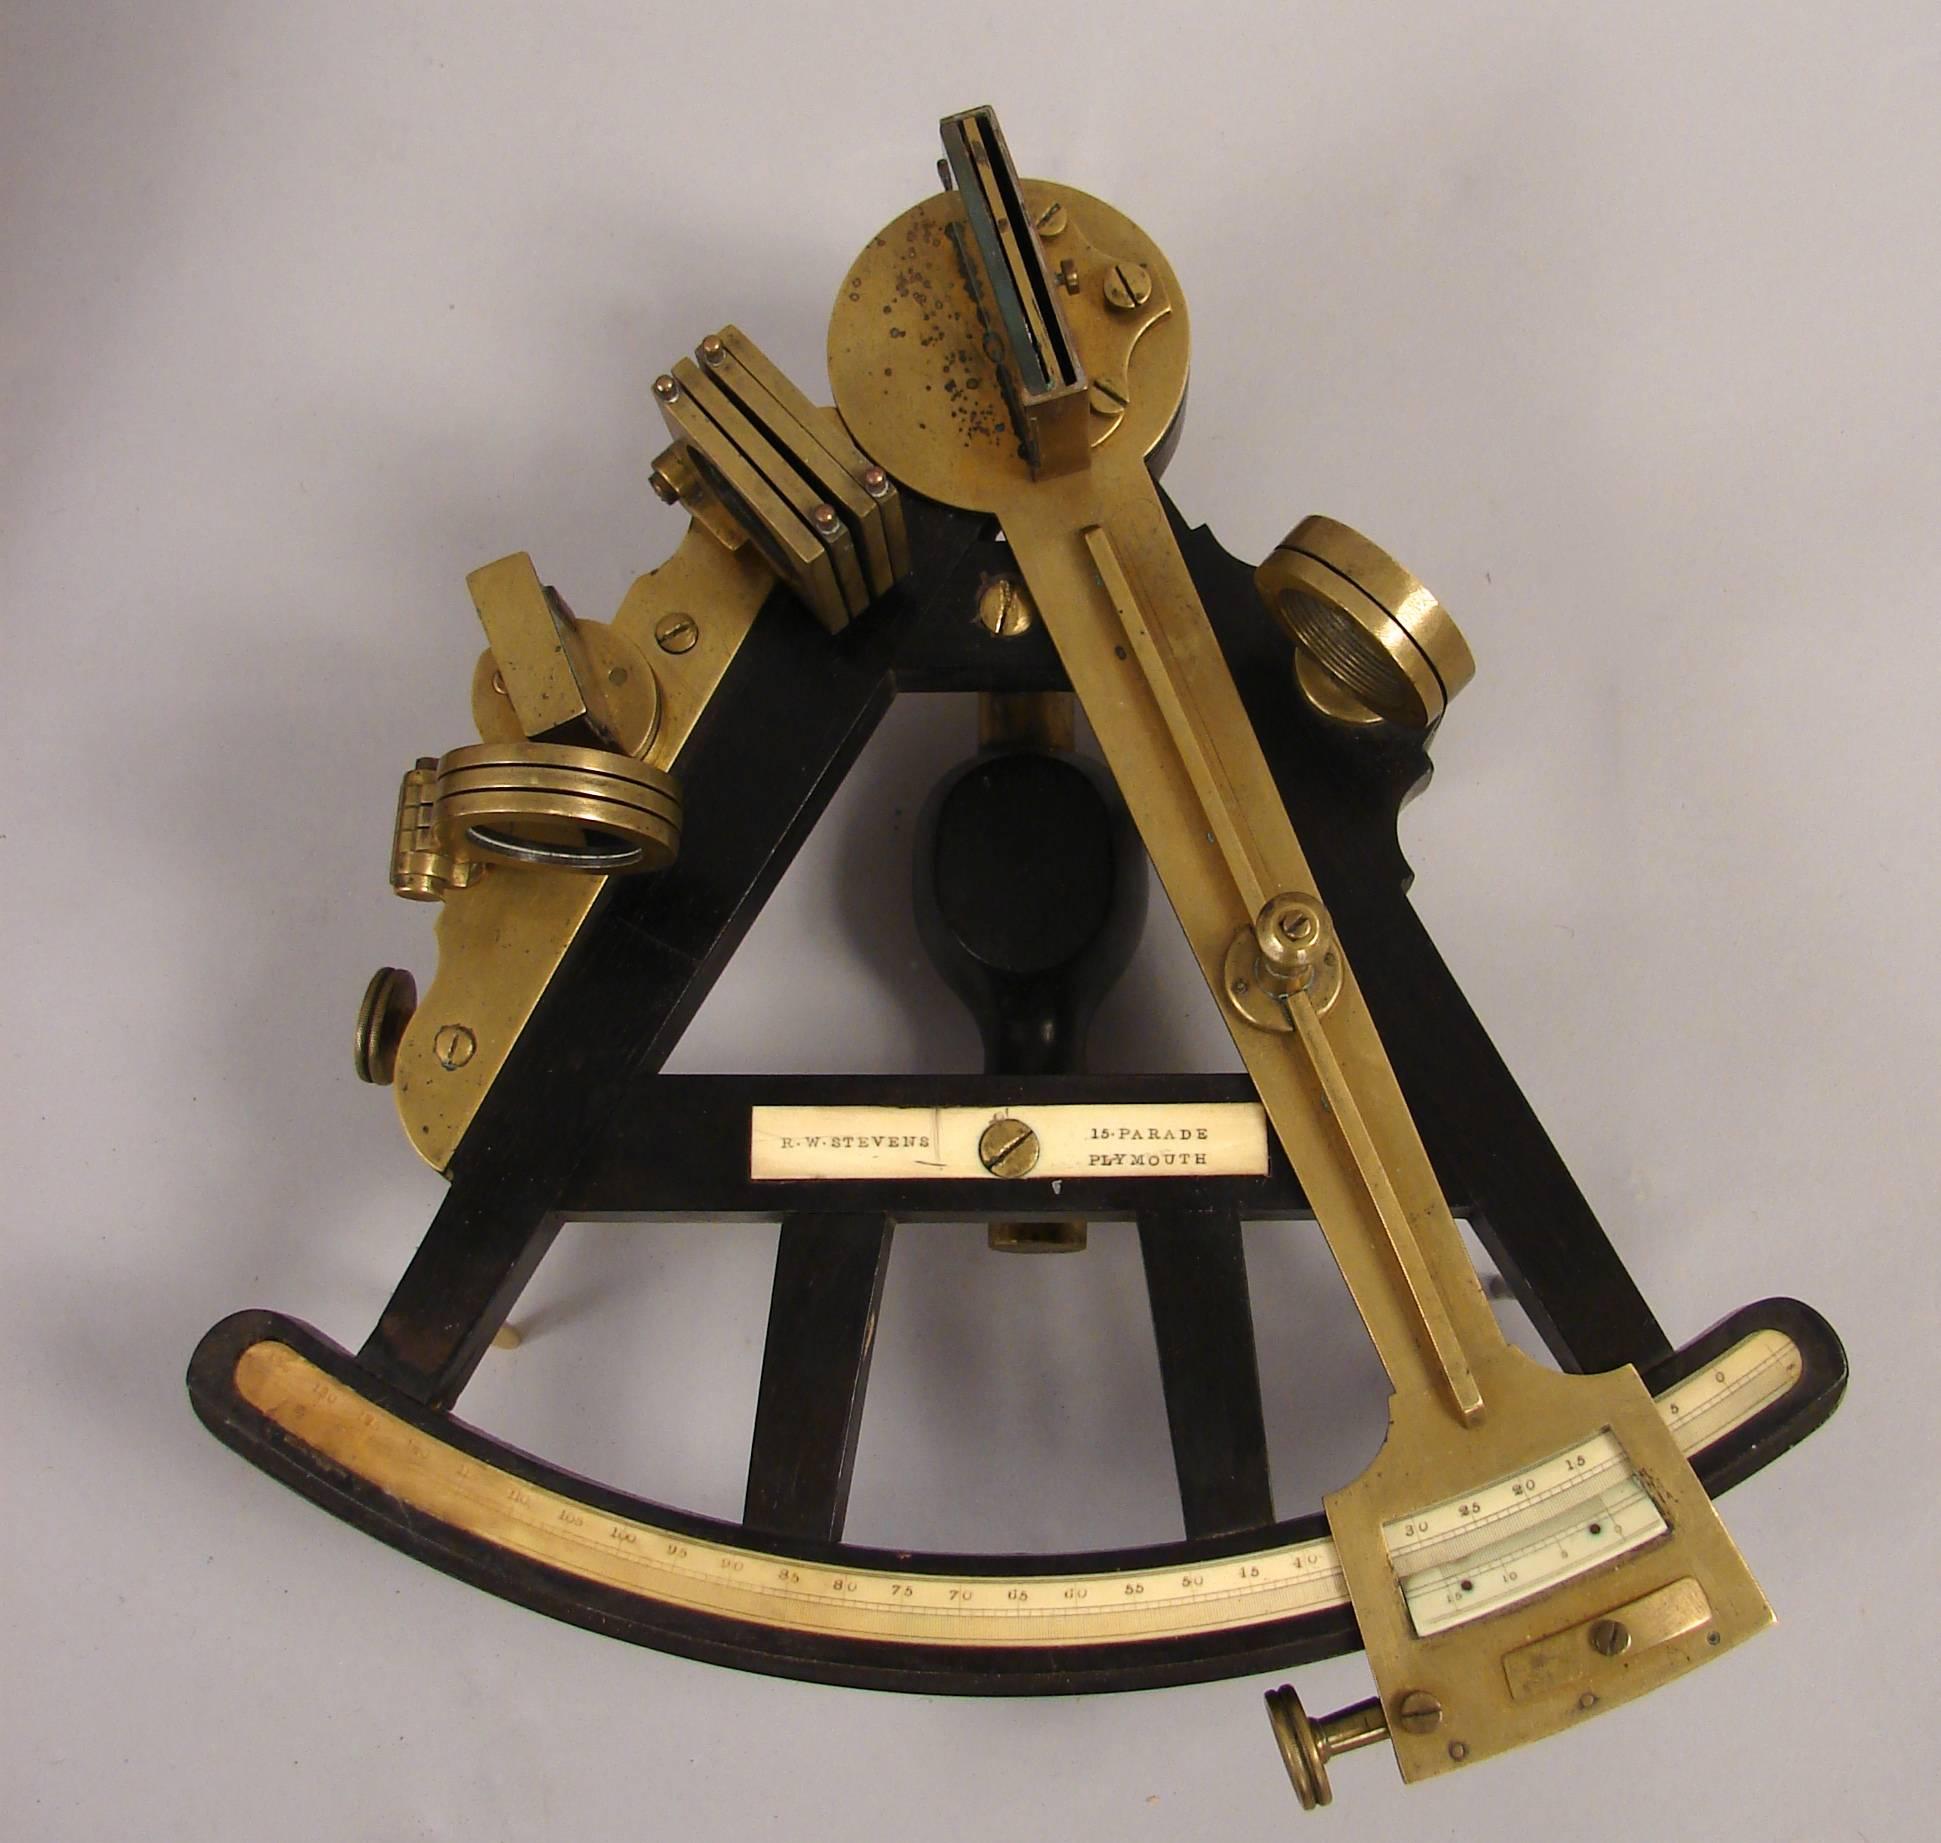 A good quality English ebony and brass octant, made and labeled by R. W. Stevens, retaining its original mahogany case, circa 1825.